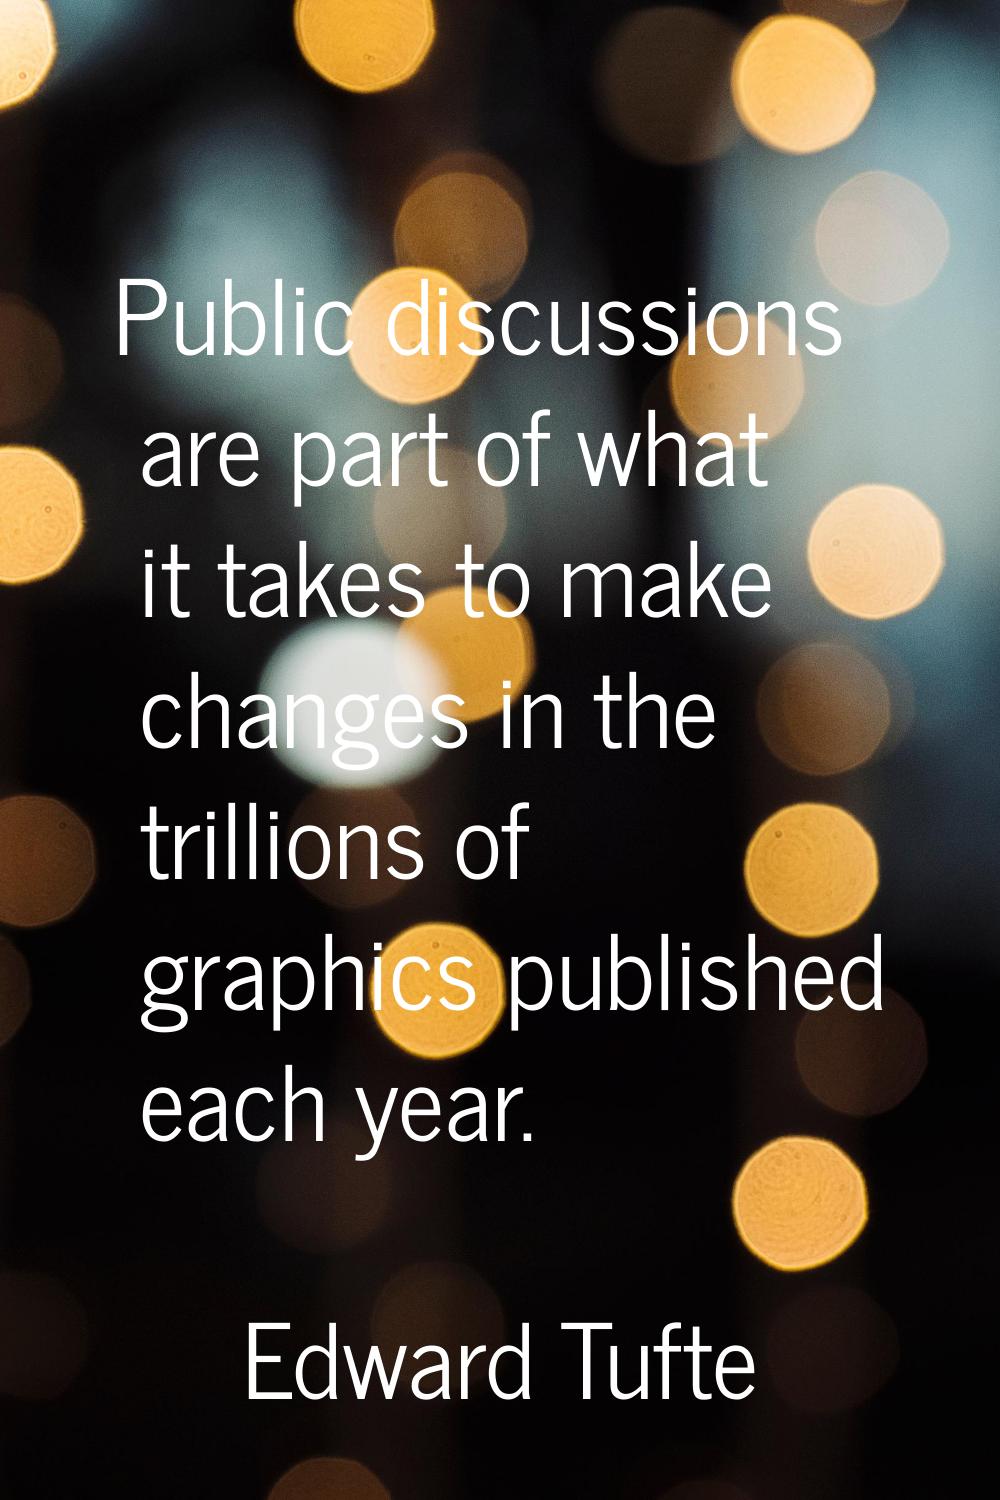 Public discussions are part of what it takes to make changes in the trillions of graphics published